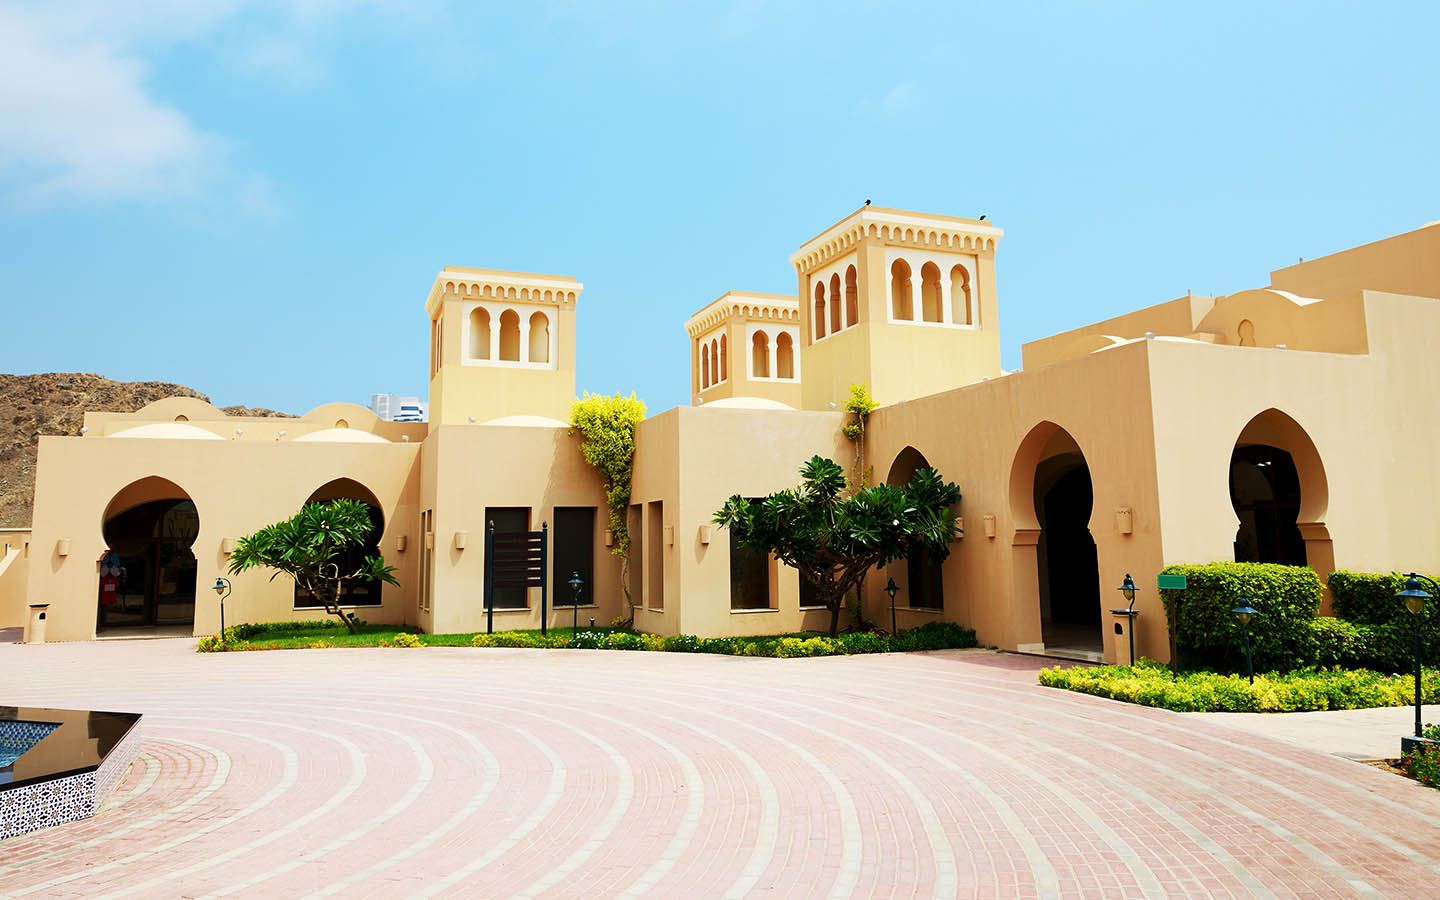 the popular Areas to rent properties in Fujairah for Expats also include numerous luxury villas